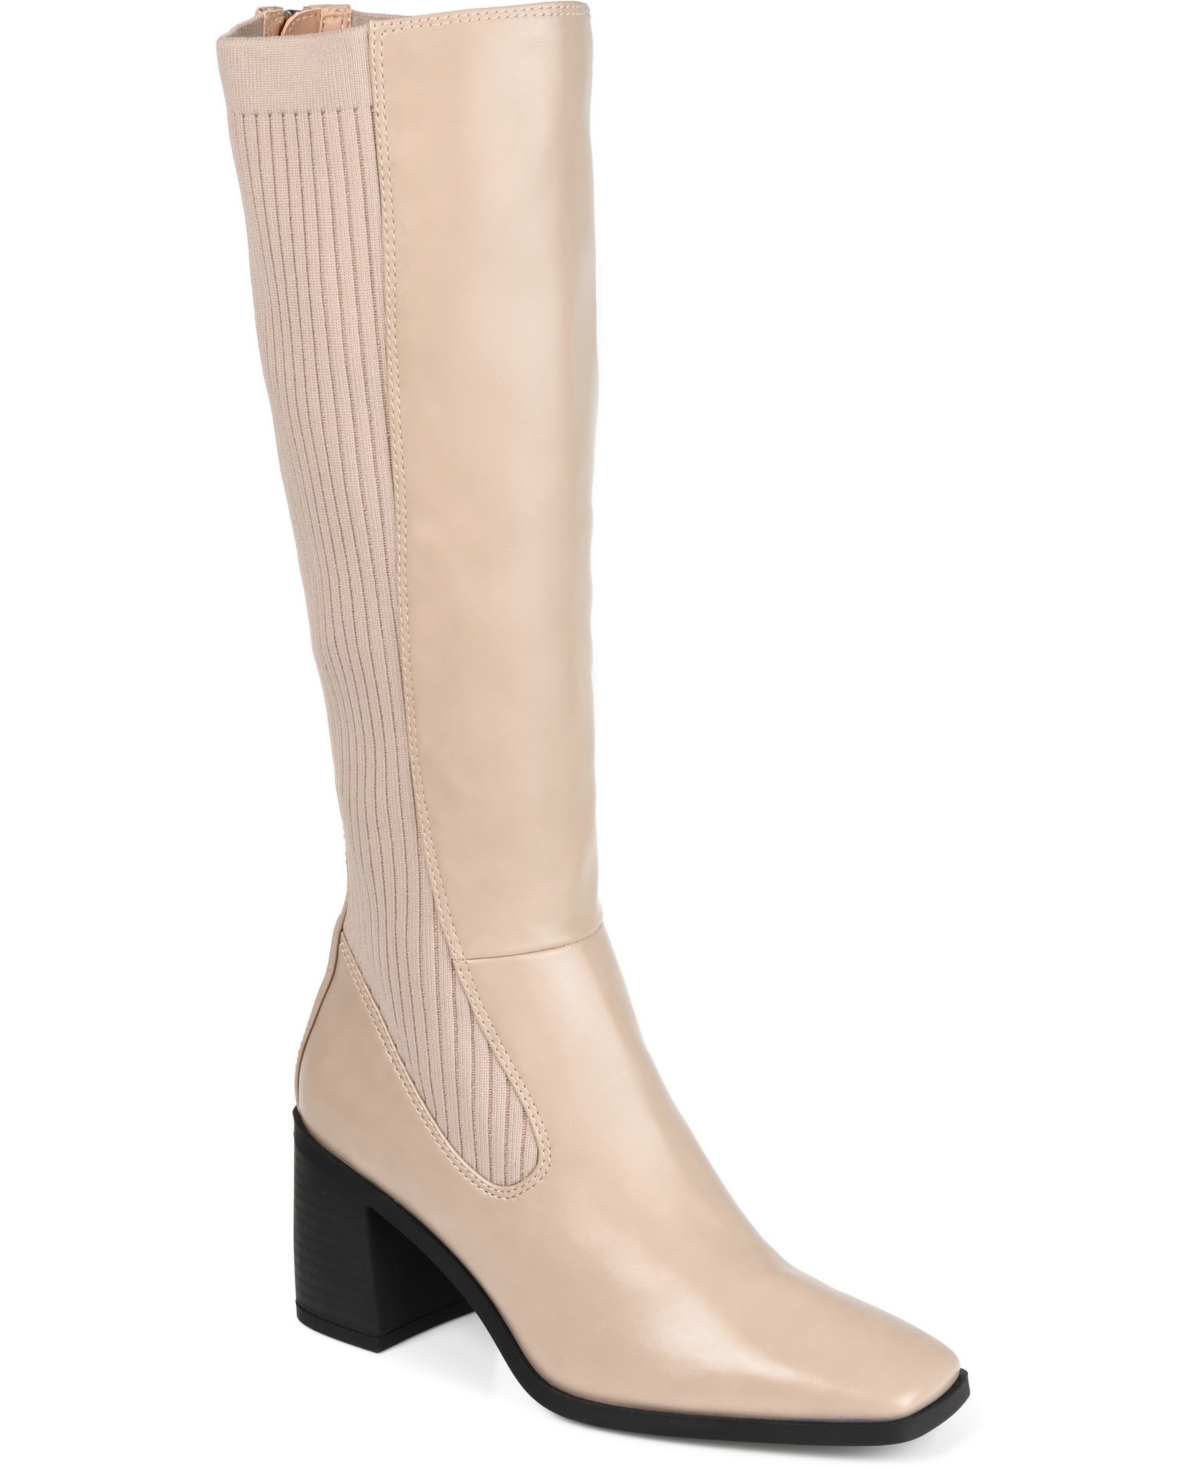 Women's Winny Knee High Boots - Taupe